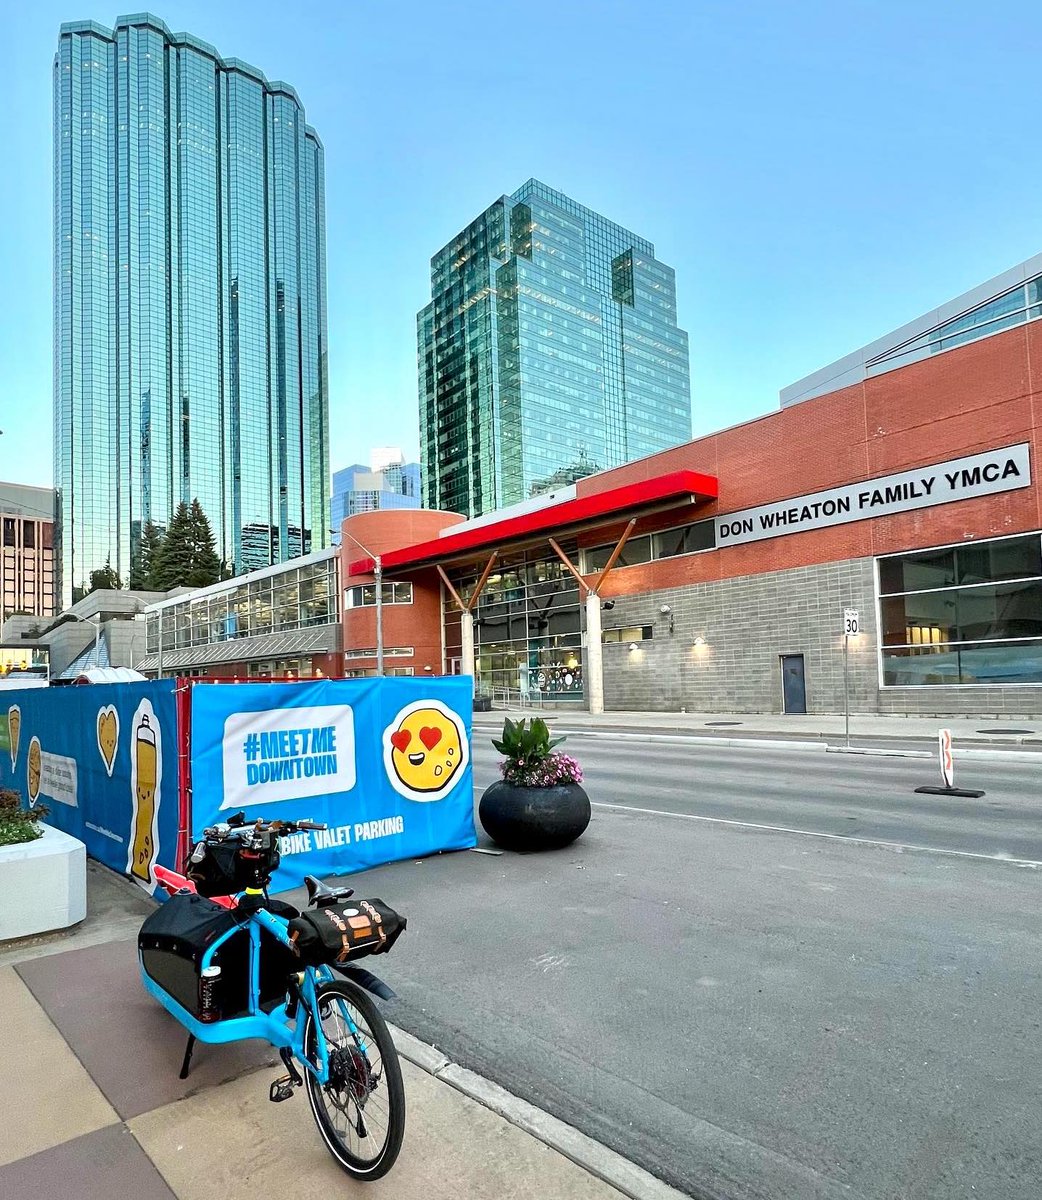 Edmonton Launches Bike Valet Parking Pilot Project to Draw More People to Downtown #cycling #ebikes #cargobikes #morecycling #bikelife #urbanmobility #yegbike #meetmedowntown tinyurl.com/4yw94r54